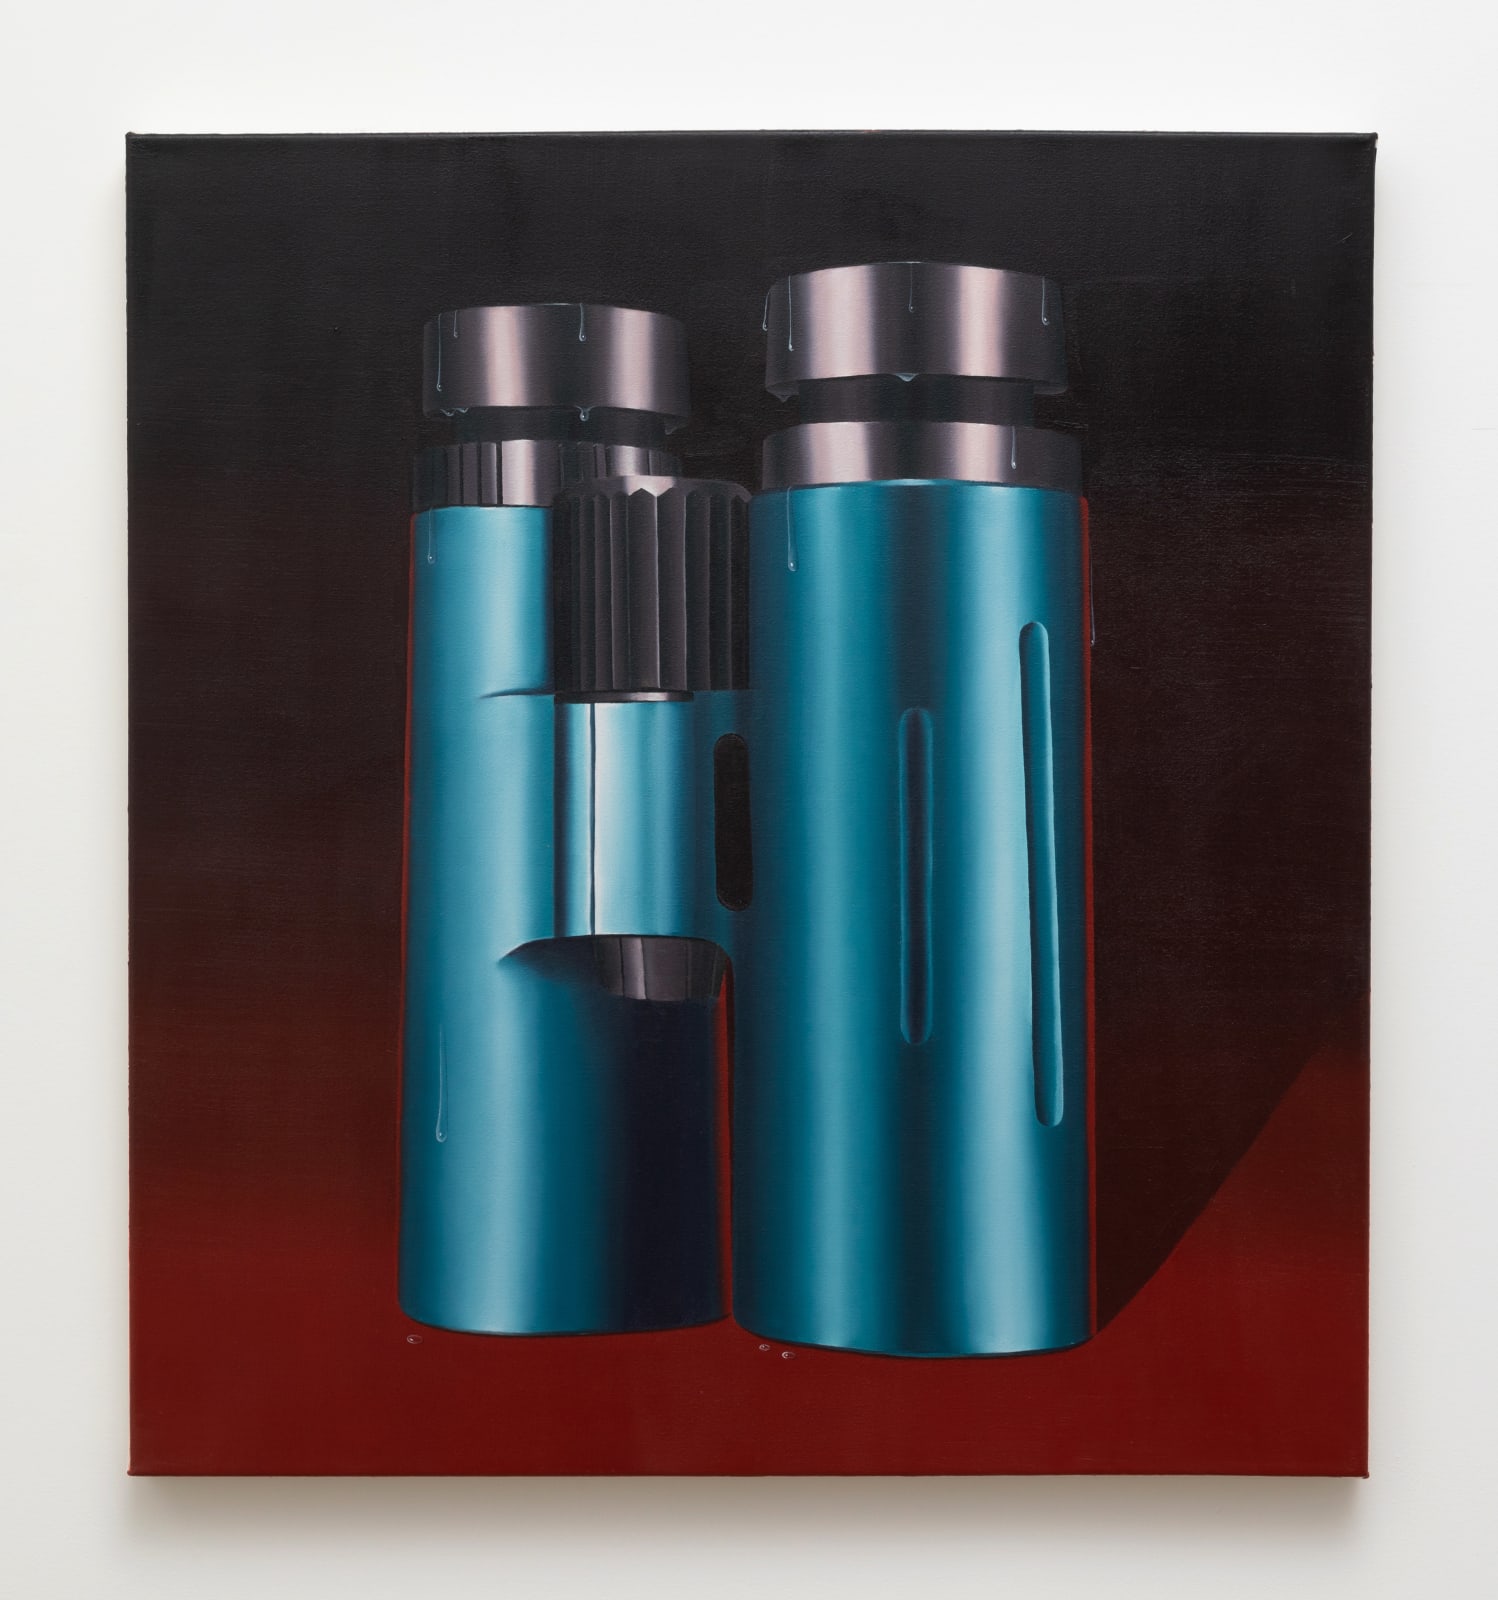 Painting portraying a pair of metallic blue binoculars against a dark burgundy background, with tears or sweat dripping down is form.